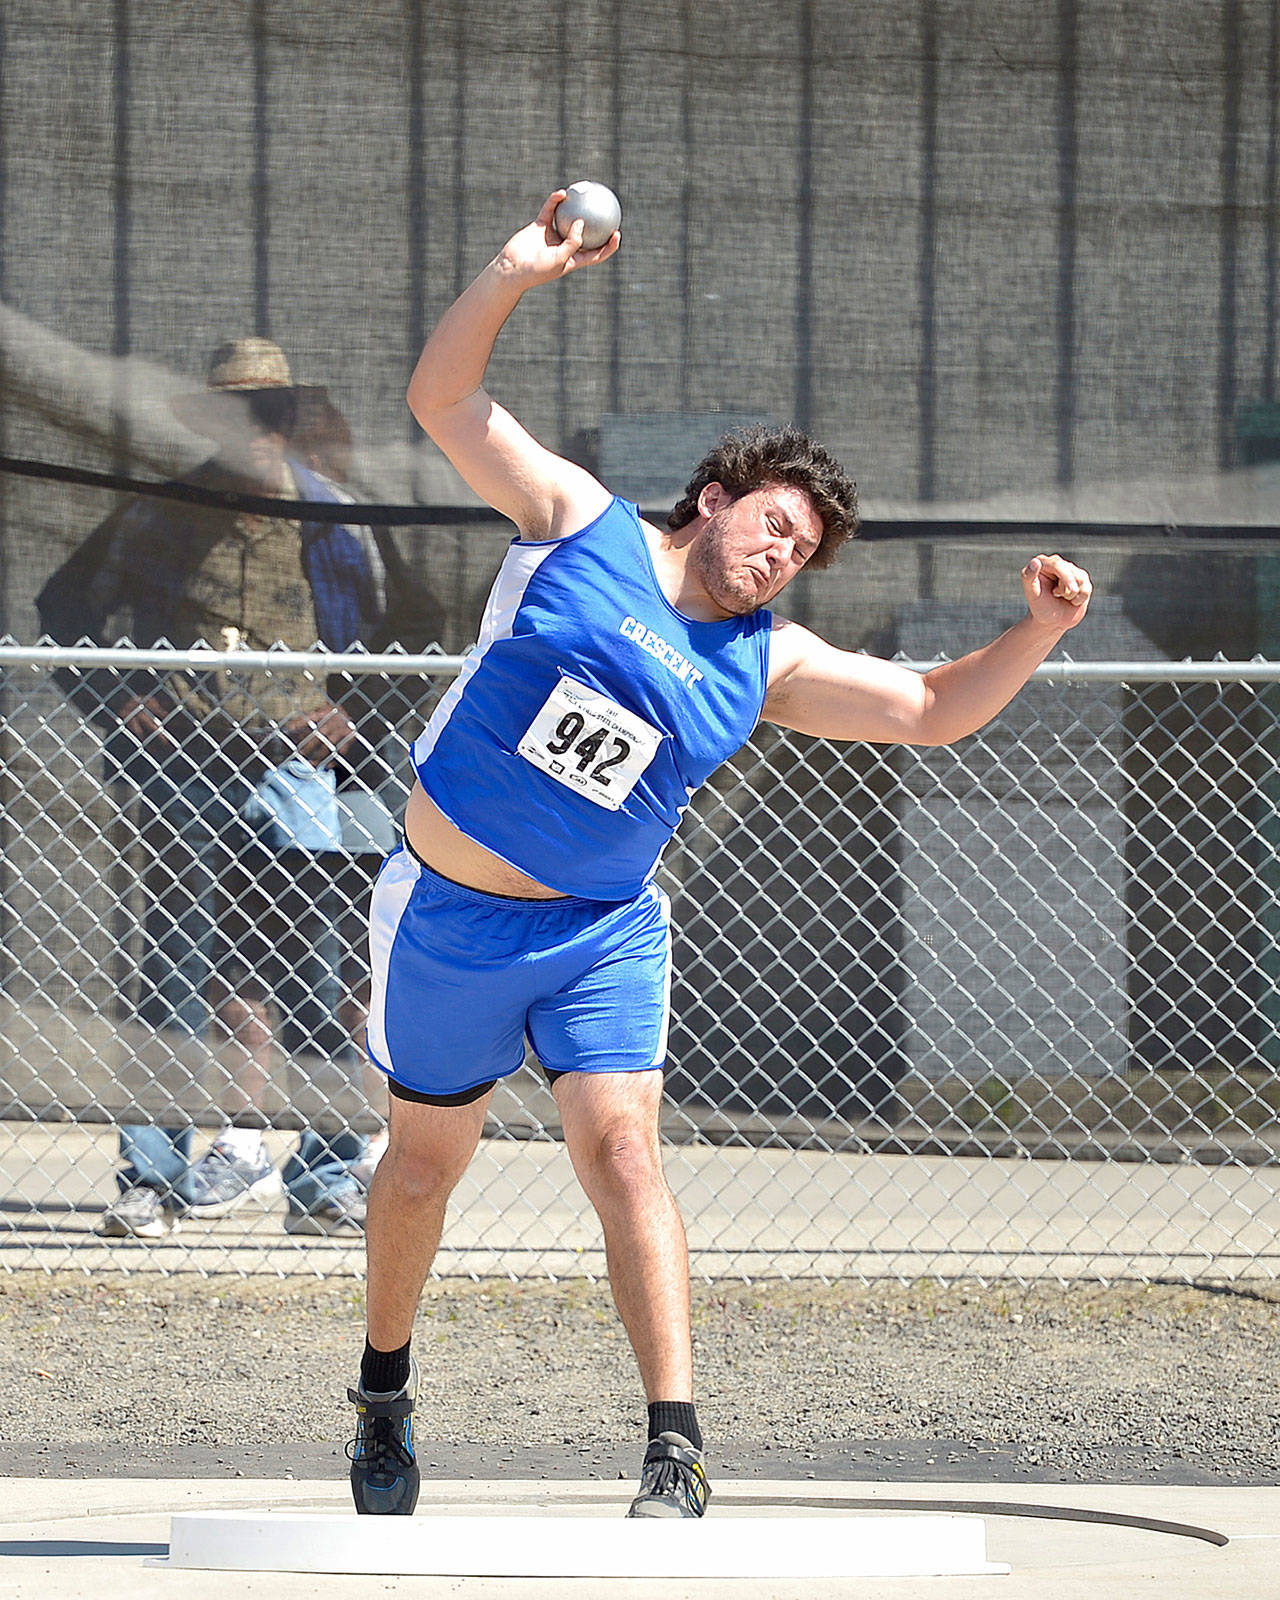 Casey Bruner/for Peninsula Daily News                                Wyatt McNeese of Crescent came in second at the state 1B Track and Field Championships in Cheney in the shot put with a put of 43-0 3/4. McNeese also came in fourth in the discus.